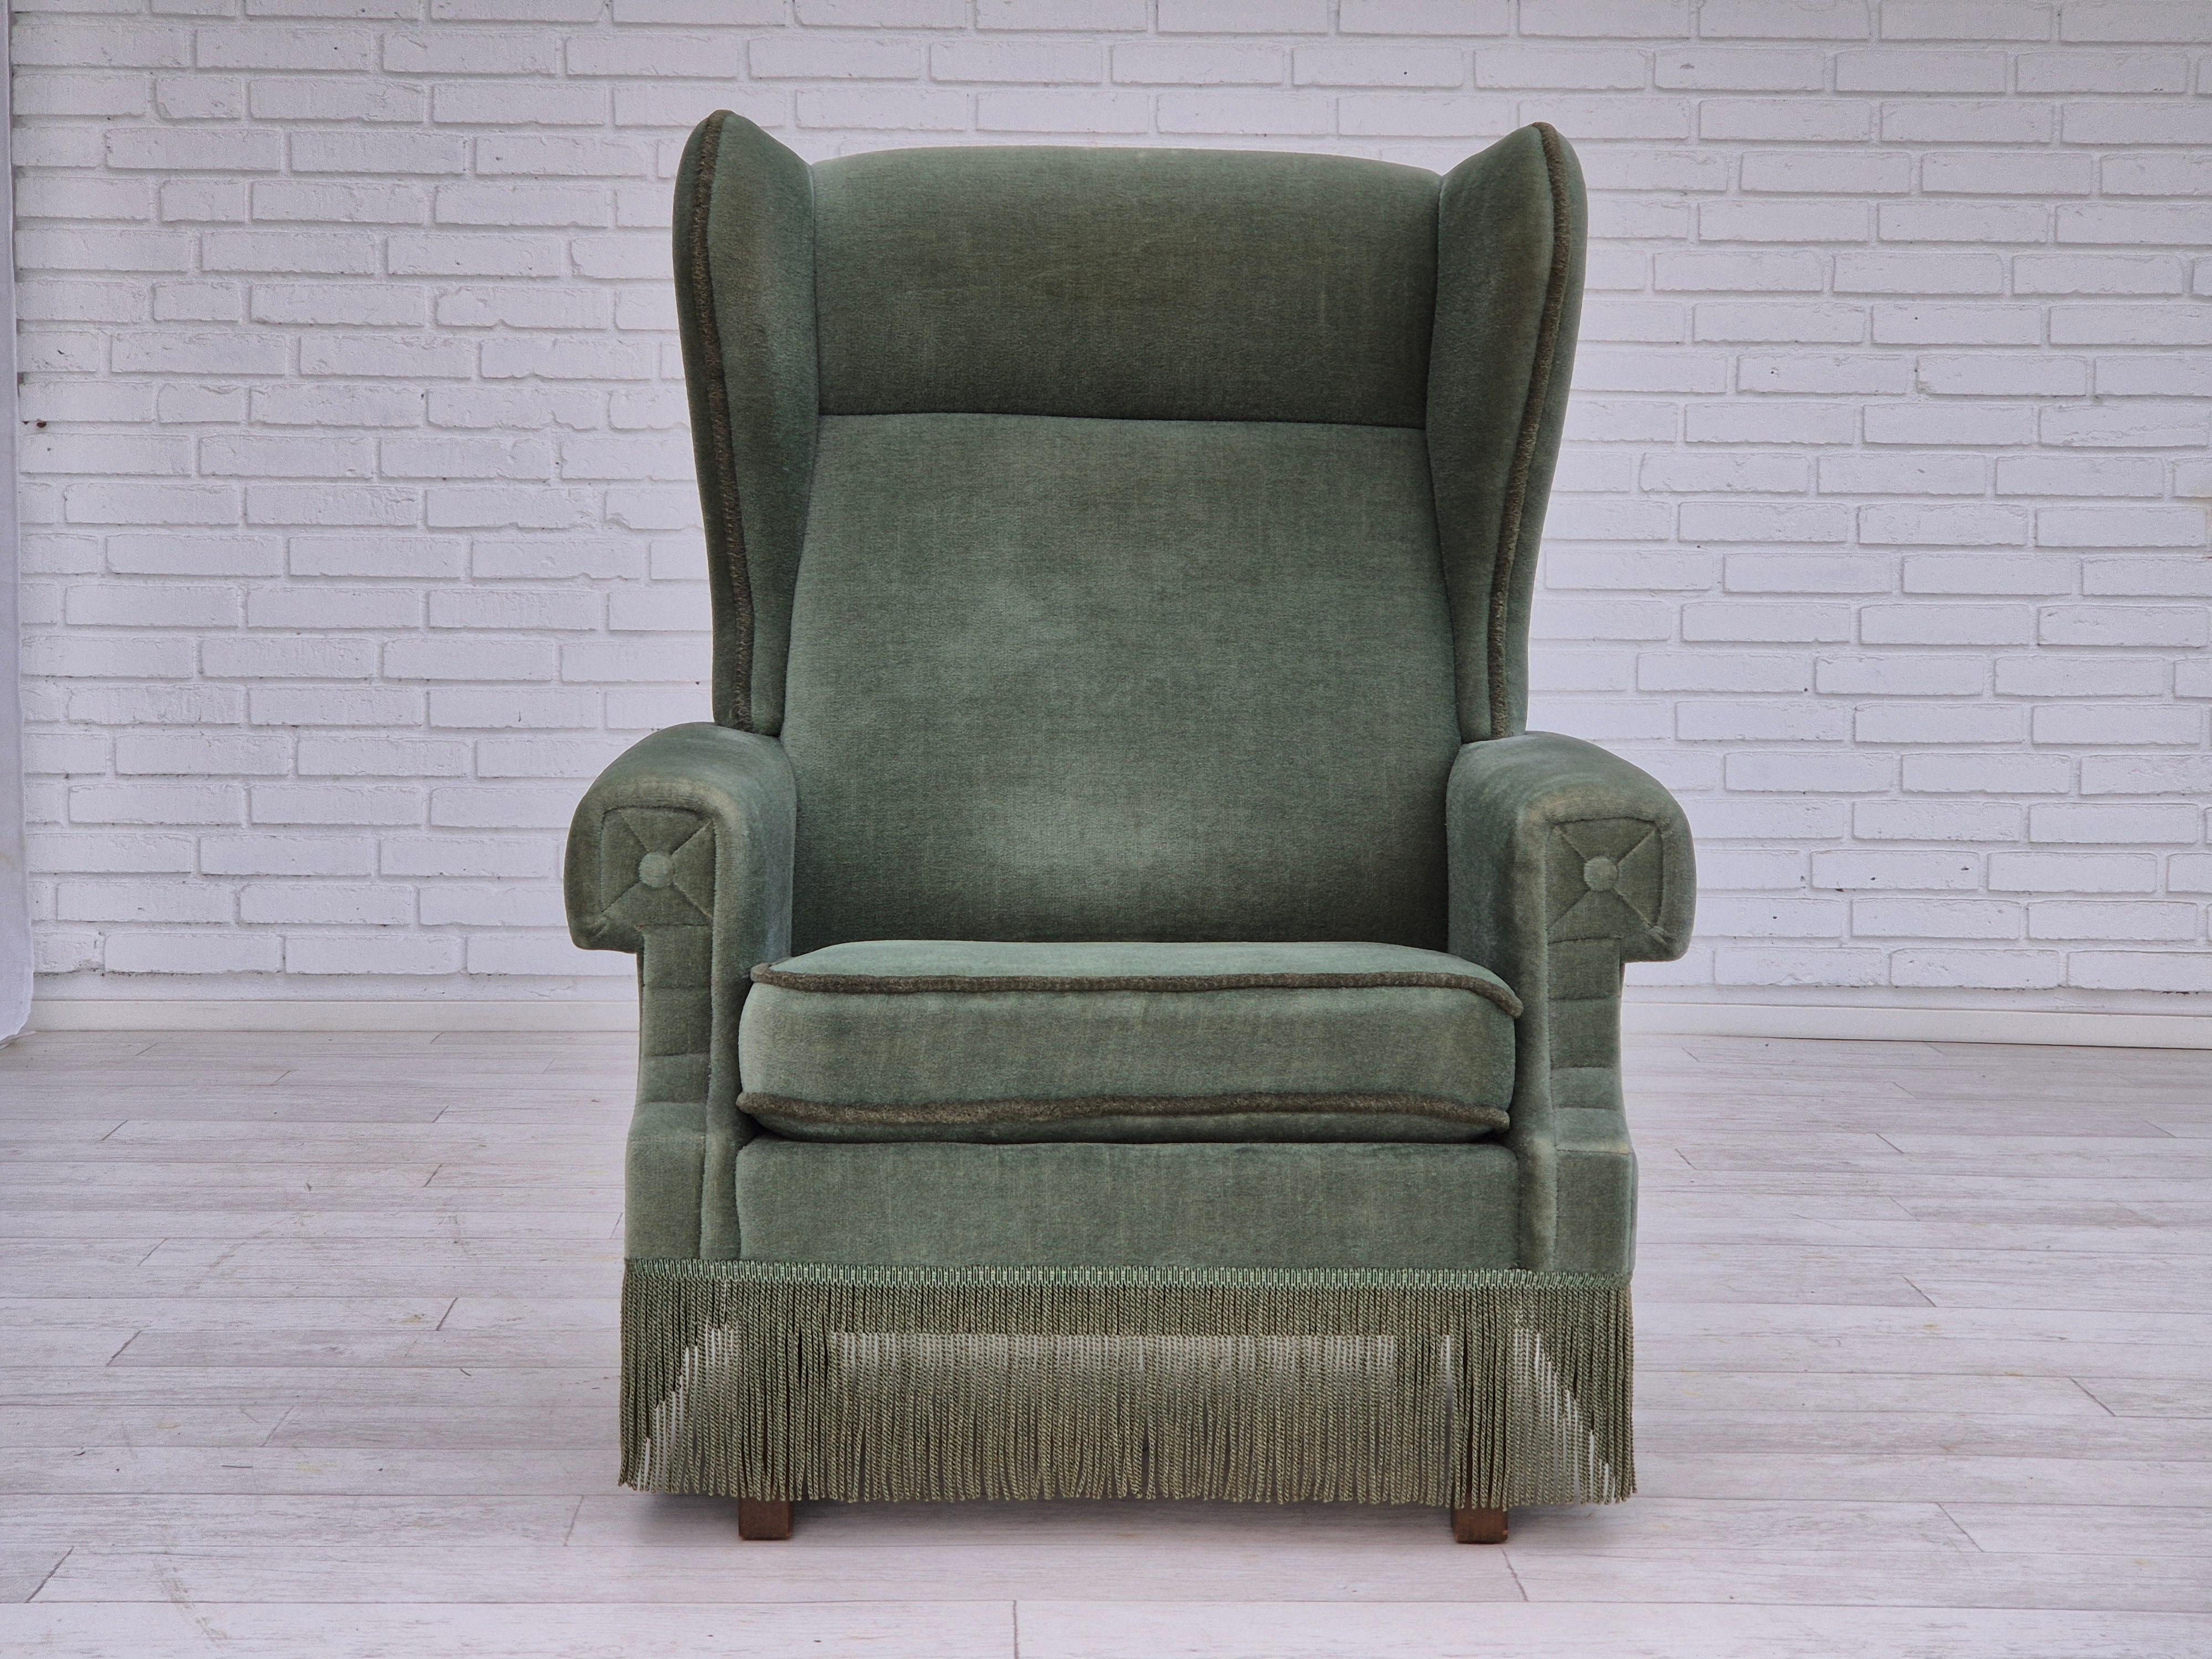 1970s, Danish wingback armchair in original very good condition: no smells and no stains. Original light green furniture velour, beech wood legs. Manufactured by Danish furniture manufacturer in about 1970-75s.